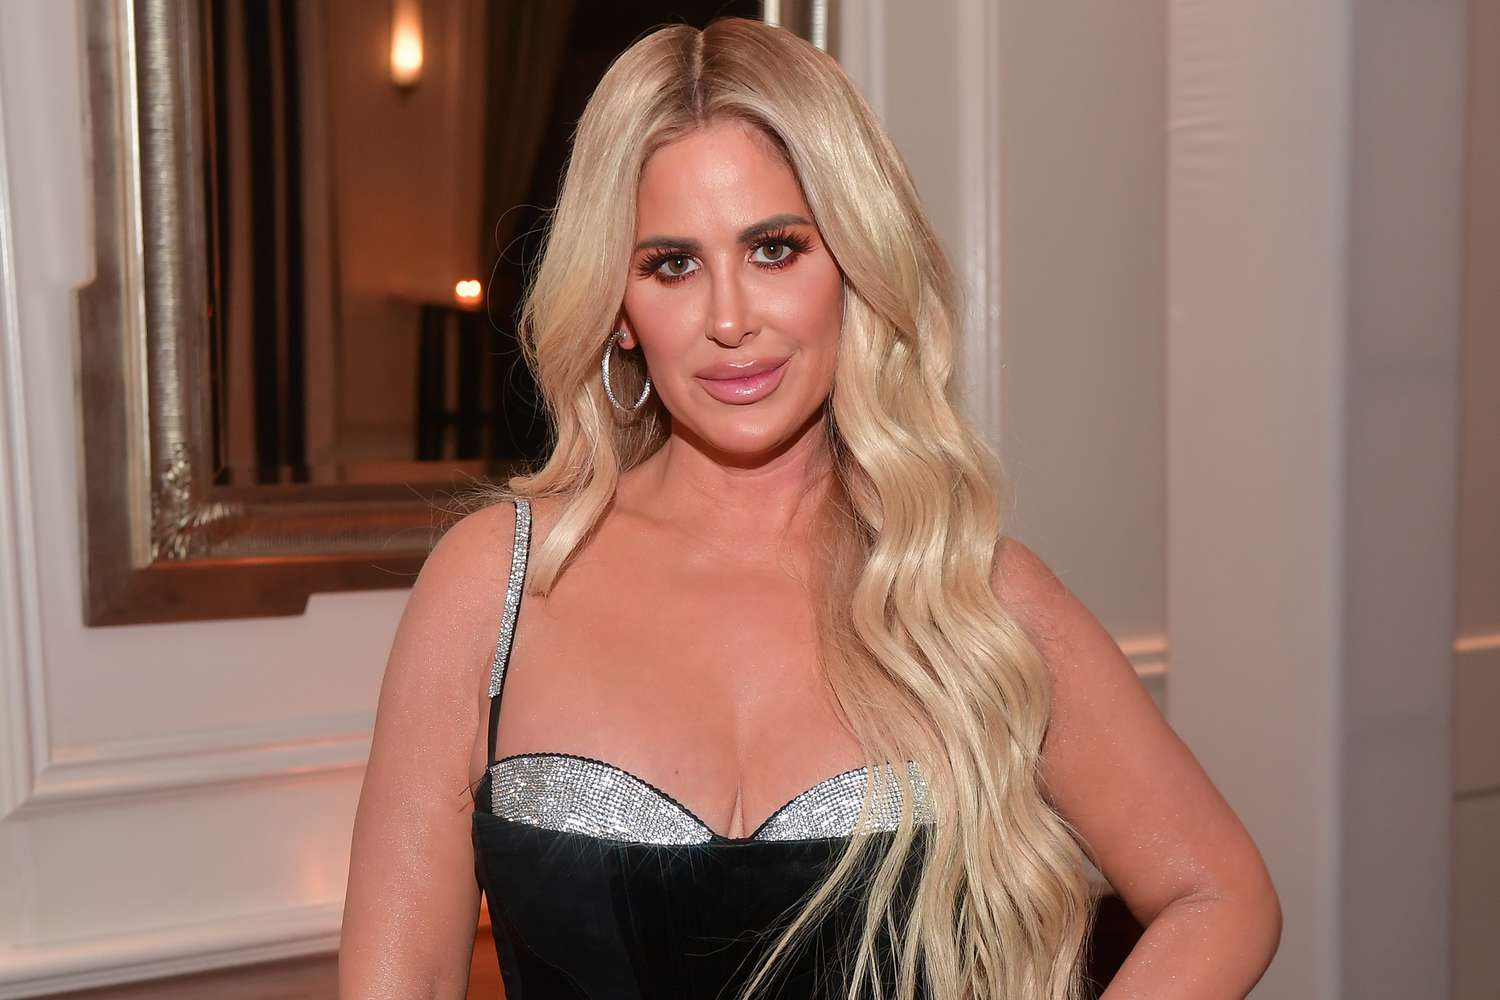 Kim Zolciak Says She Feels 'Safer' Being Vulnerable with '7 Strangers' Than Husband Kroy: 'That’s Sad' (Exclusive)